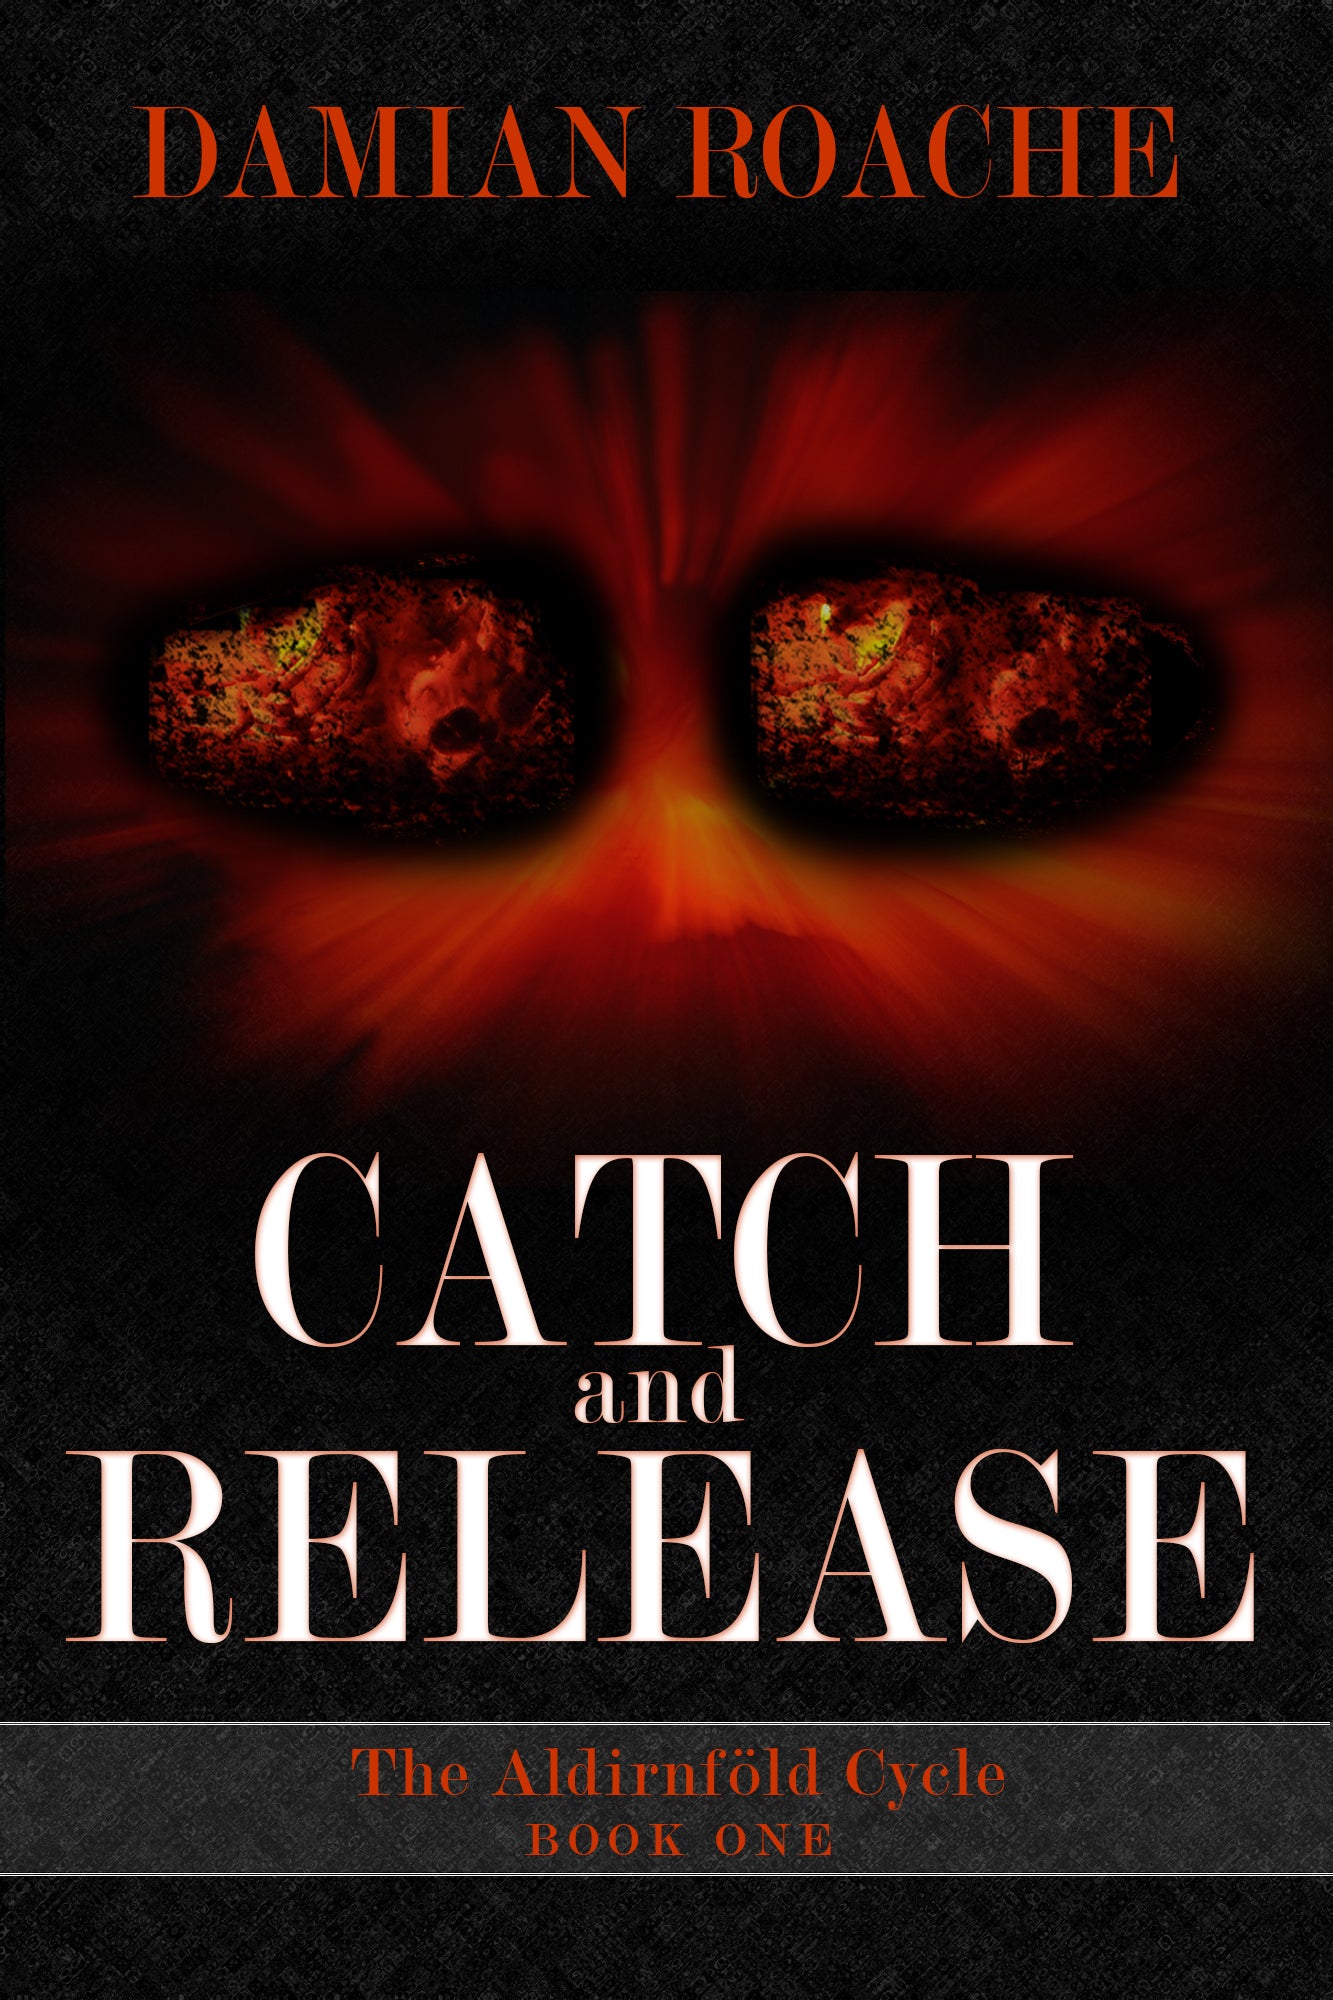 Book Review: Catch and Release by Damian Roache